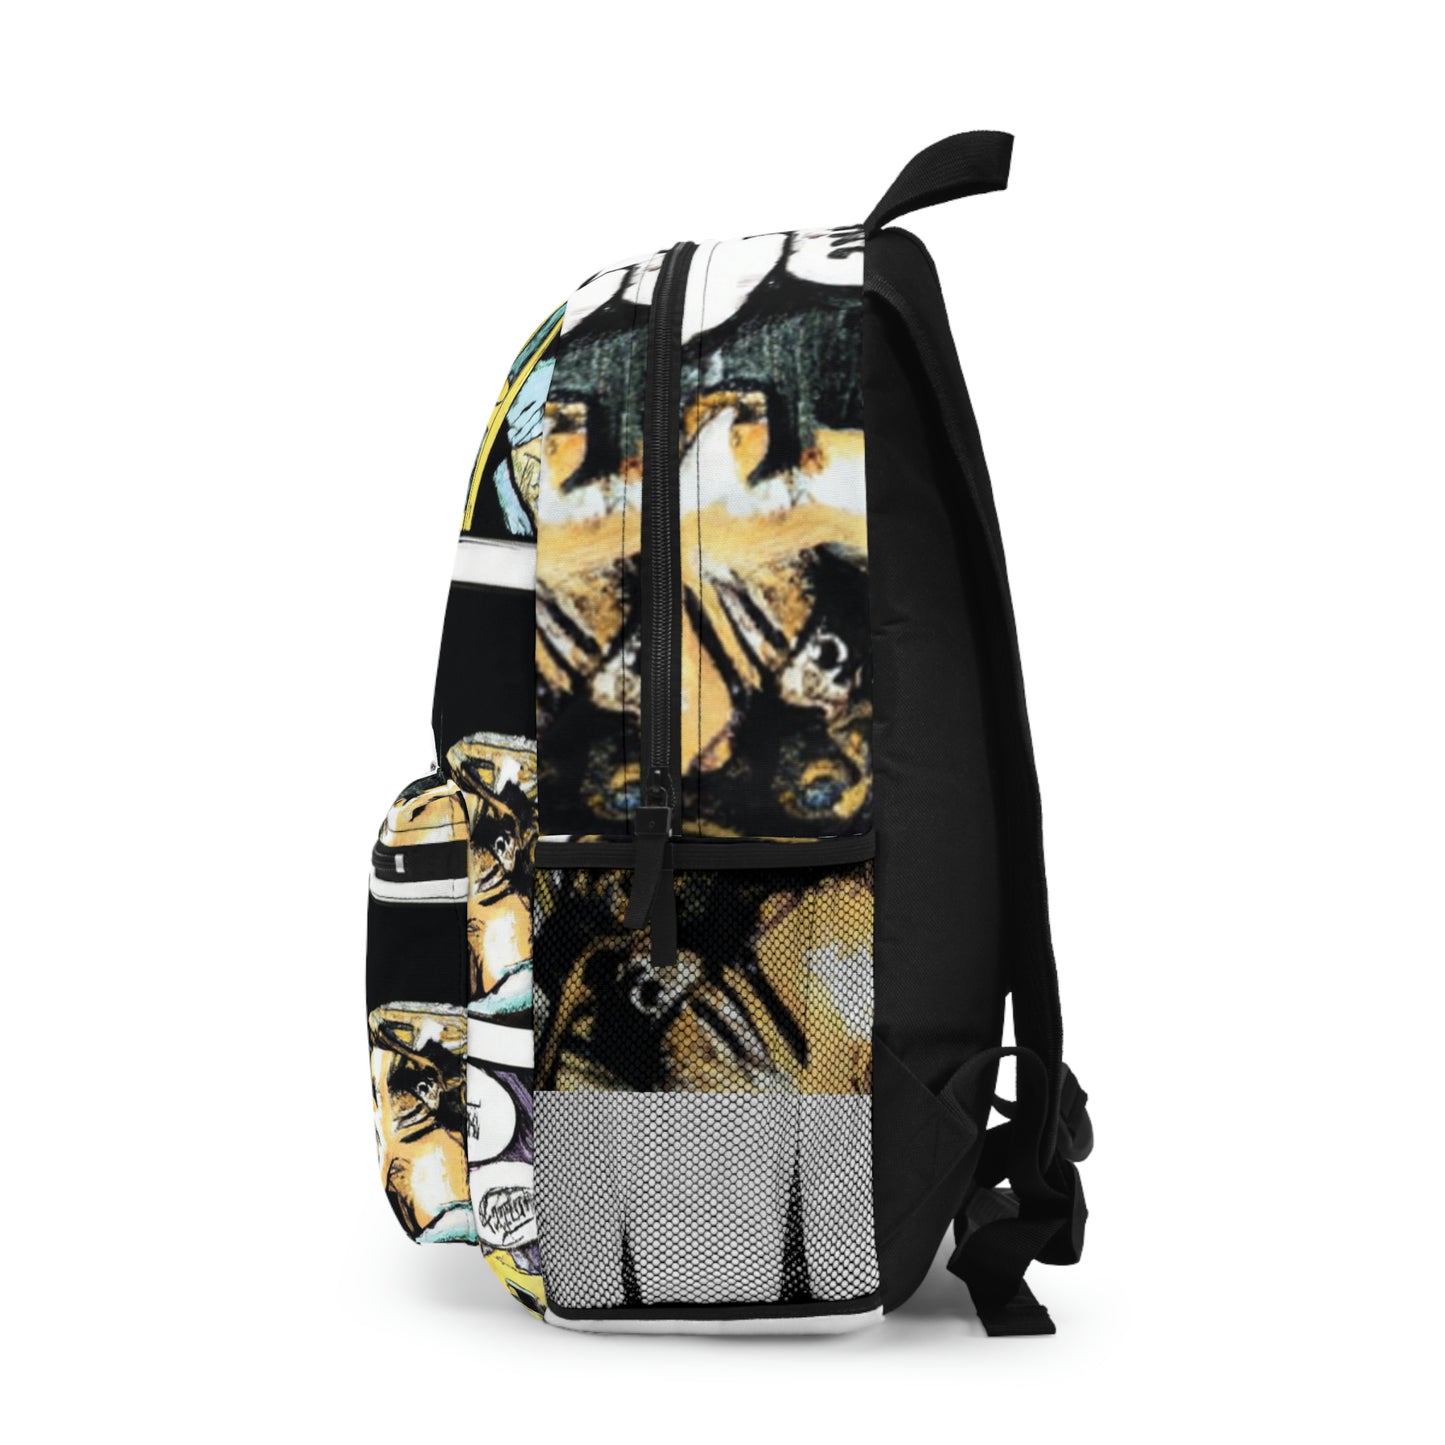 Ace Dynamo - Comic Book Backpack 1 of 1 Collectible